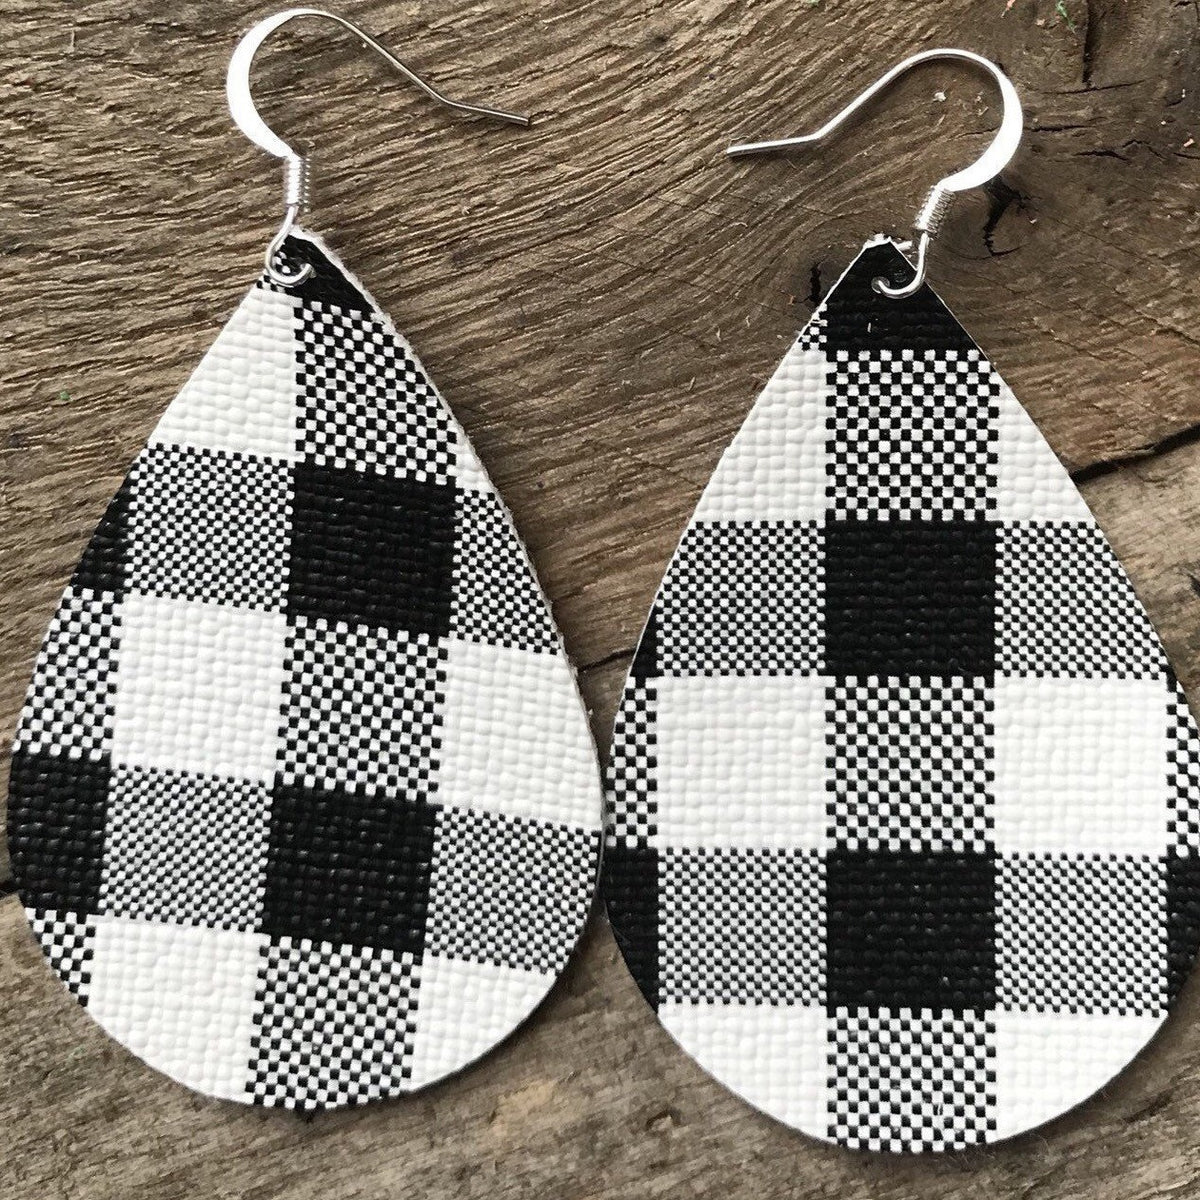 Bear earrings in buffalo check black and white  plaid with black bear in center of teardrop shaped wood slice earrings 2 inch